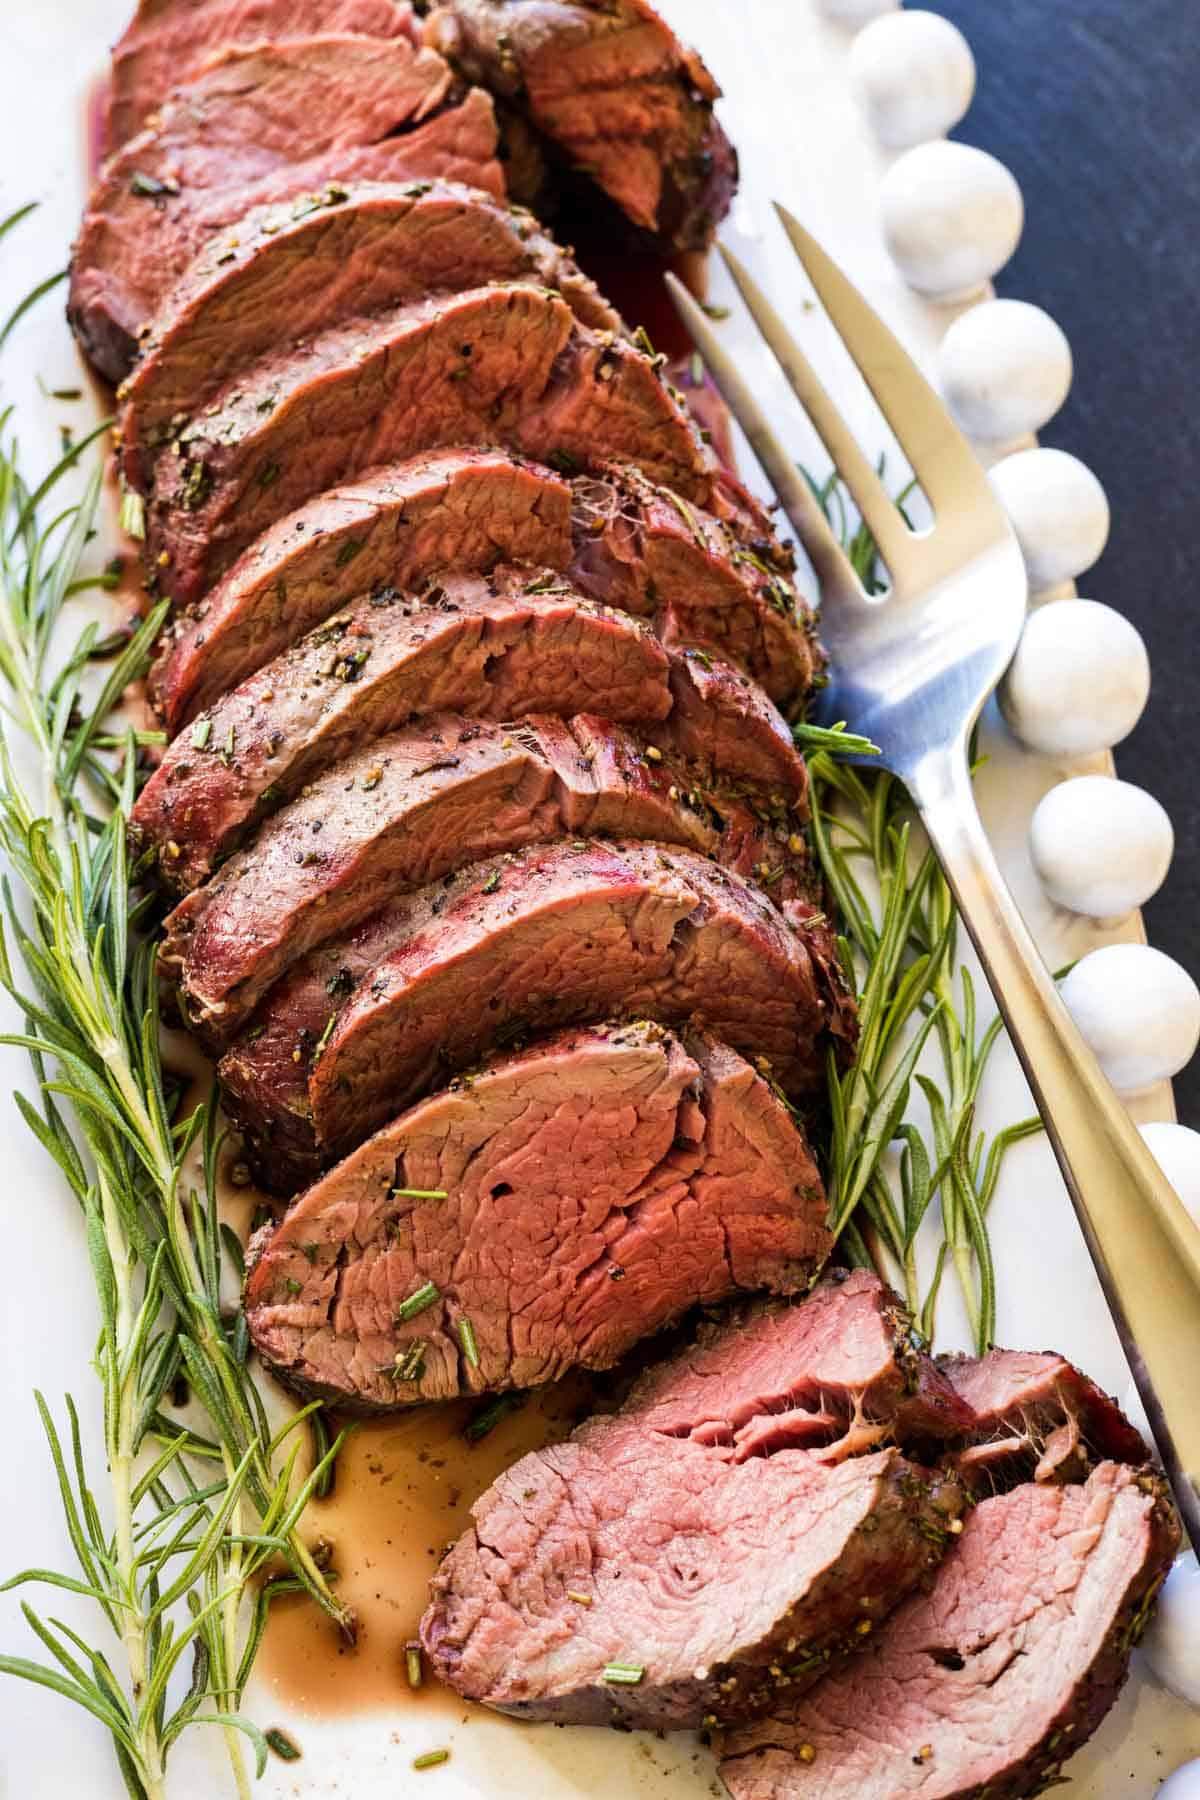 A smoked beef tenderloin cut into thick slices with fresh rosemary on the side.